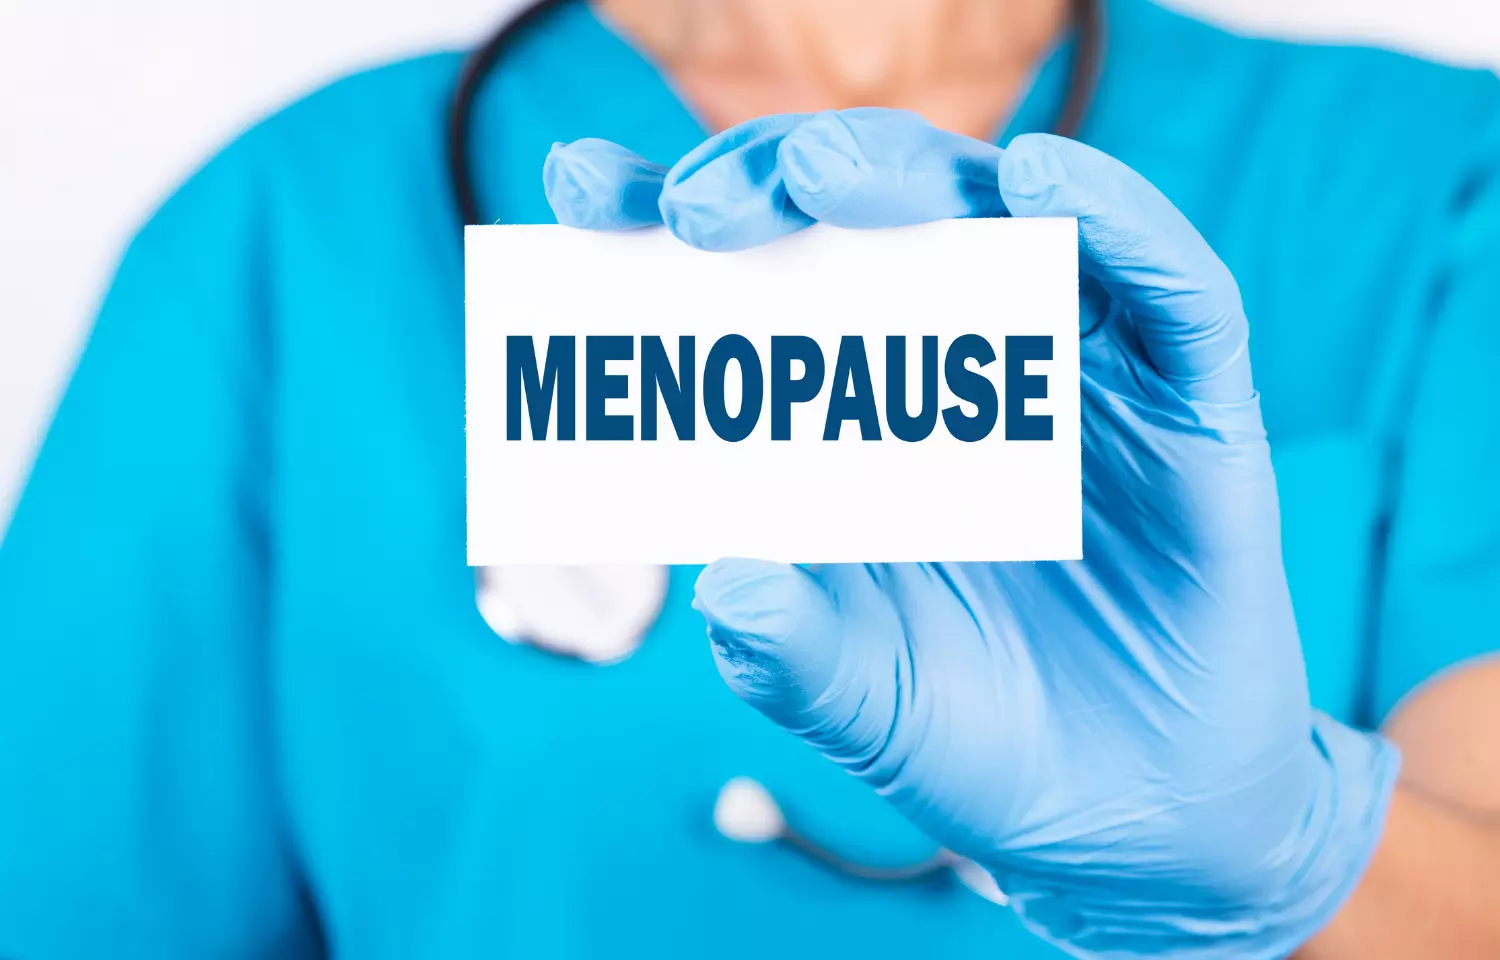 Hormonal changes during menopause are directly related to increase in LDL cholesterol